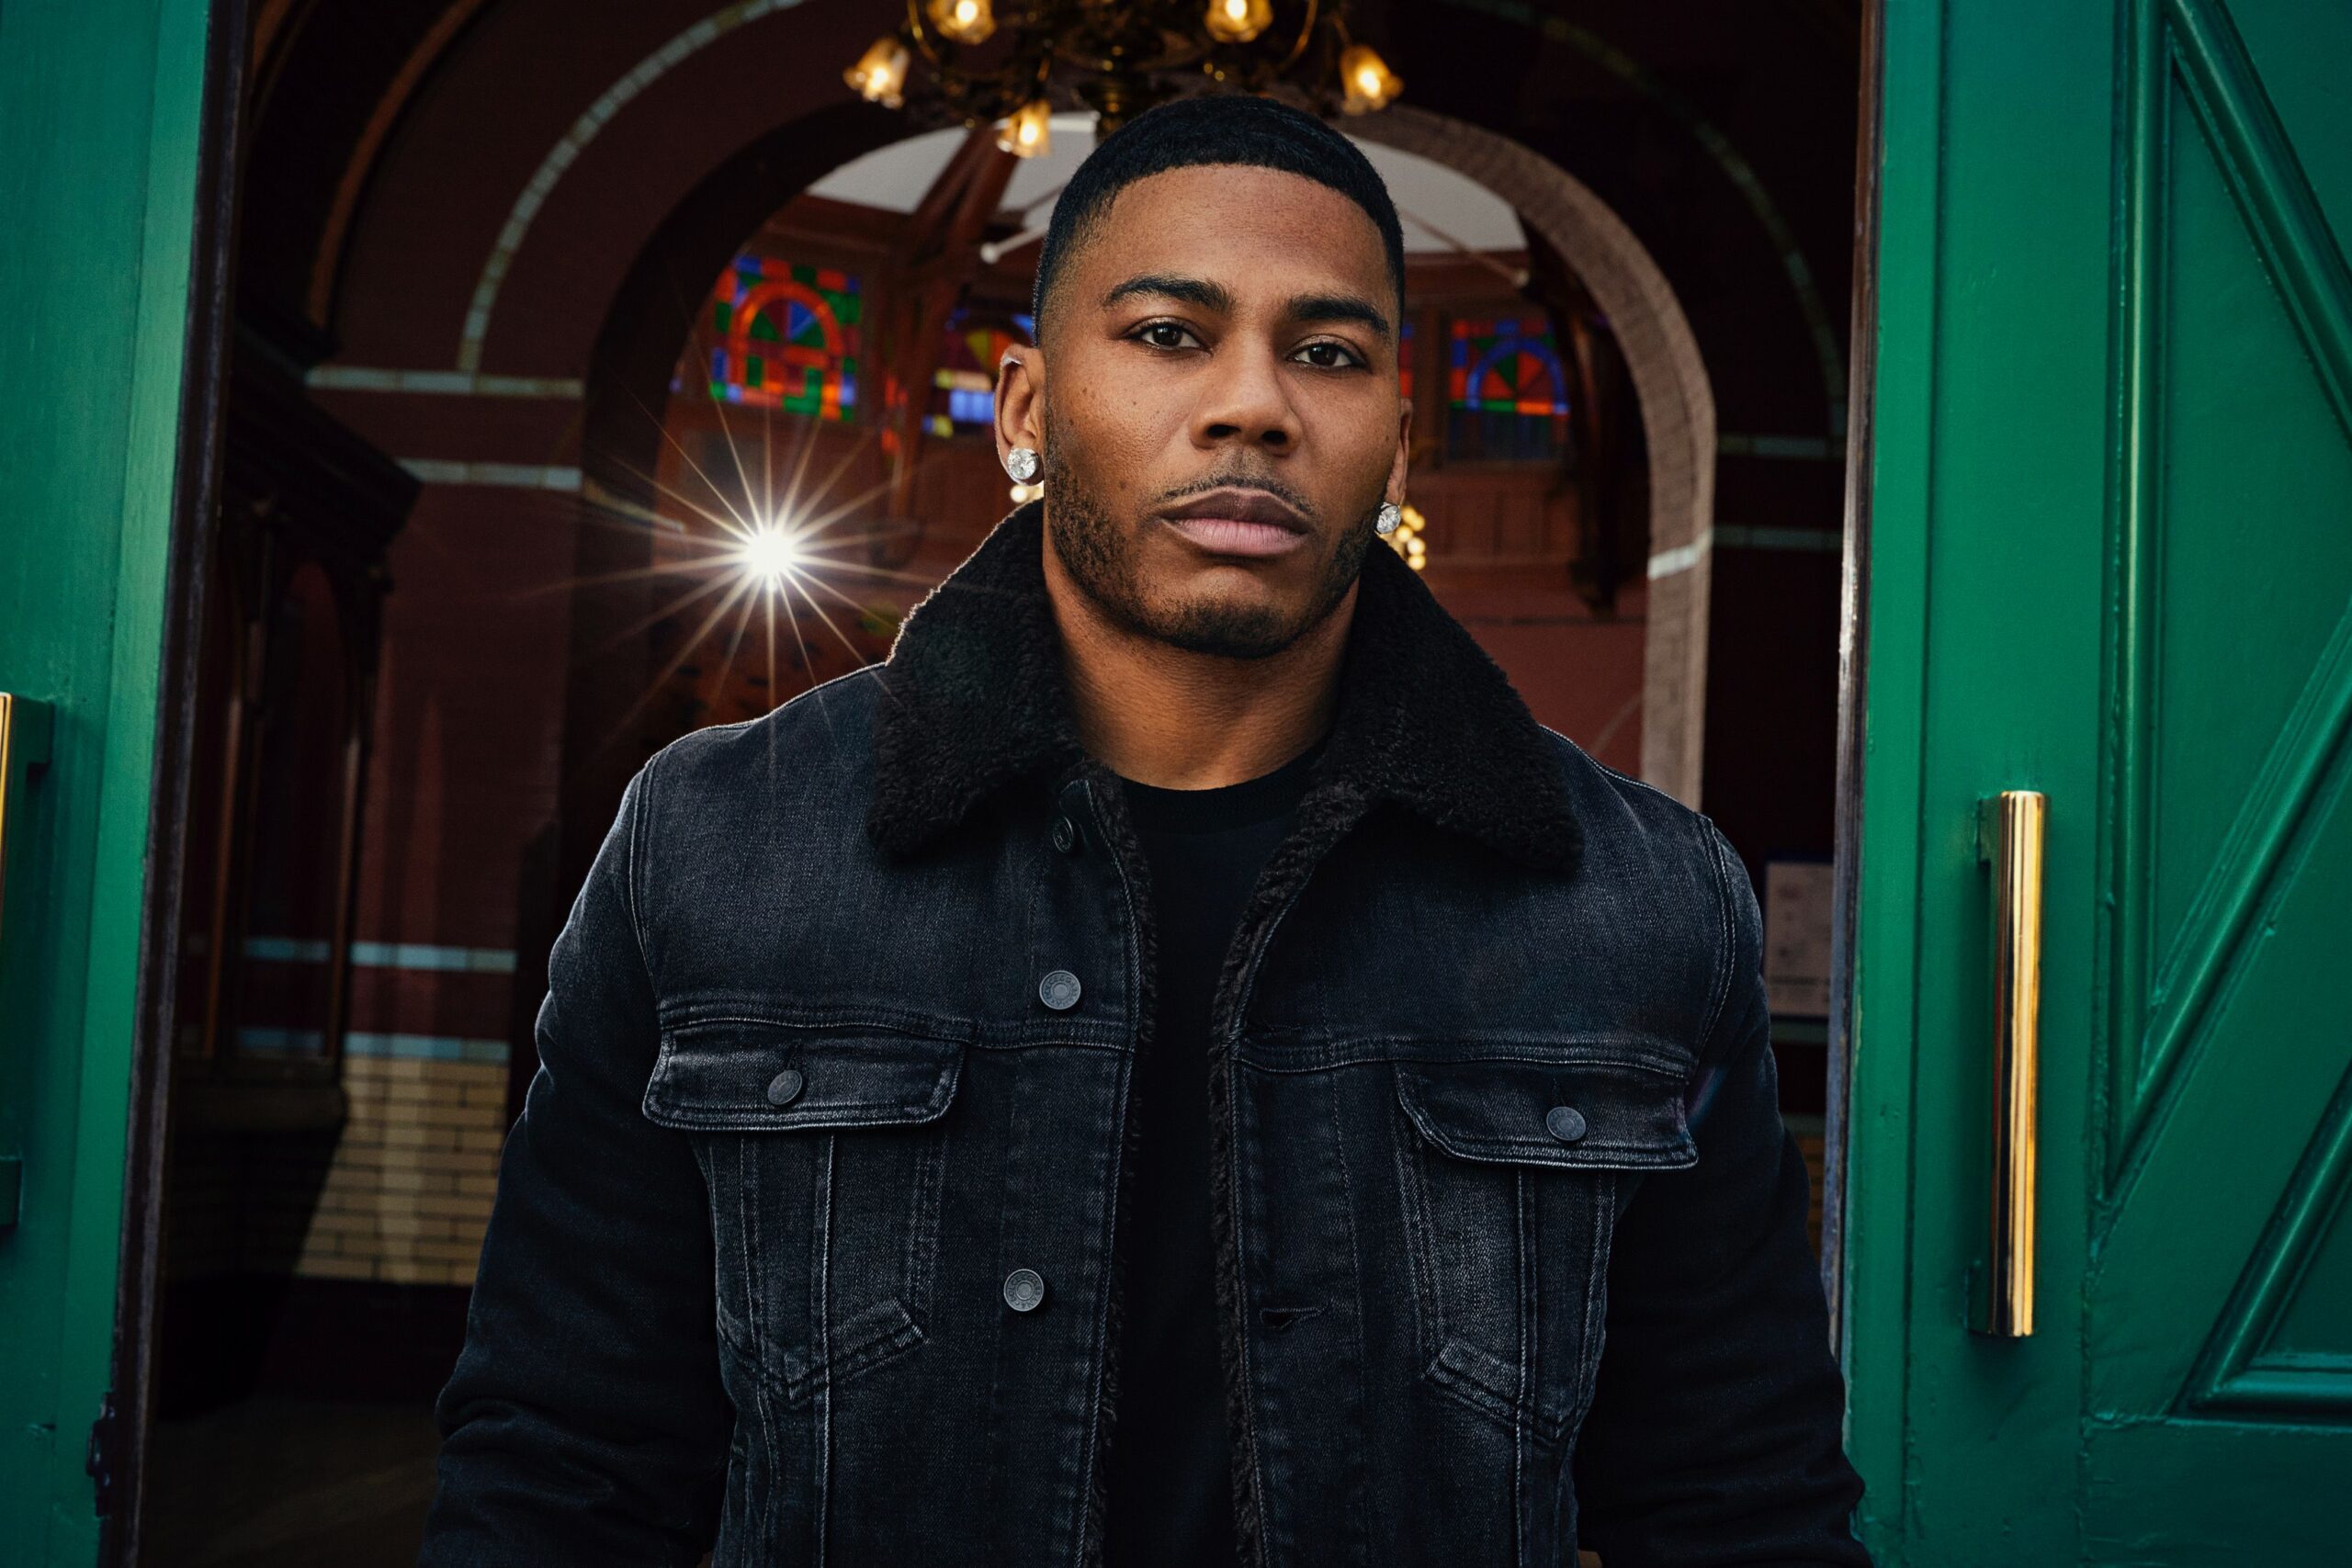 Nelly to play show to benefit WAC educational efforts Sept. 12